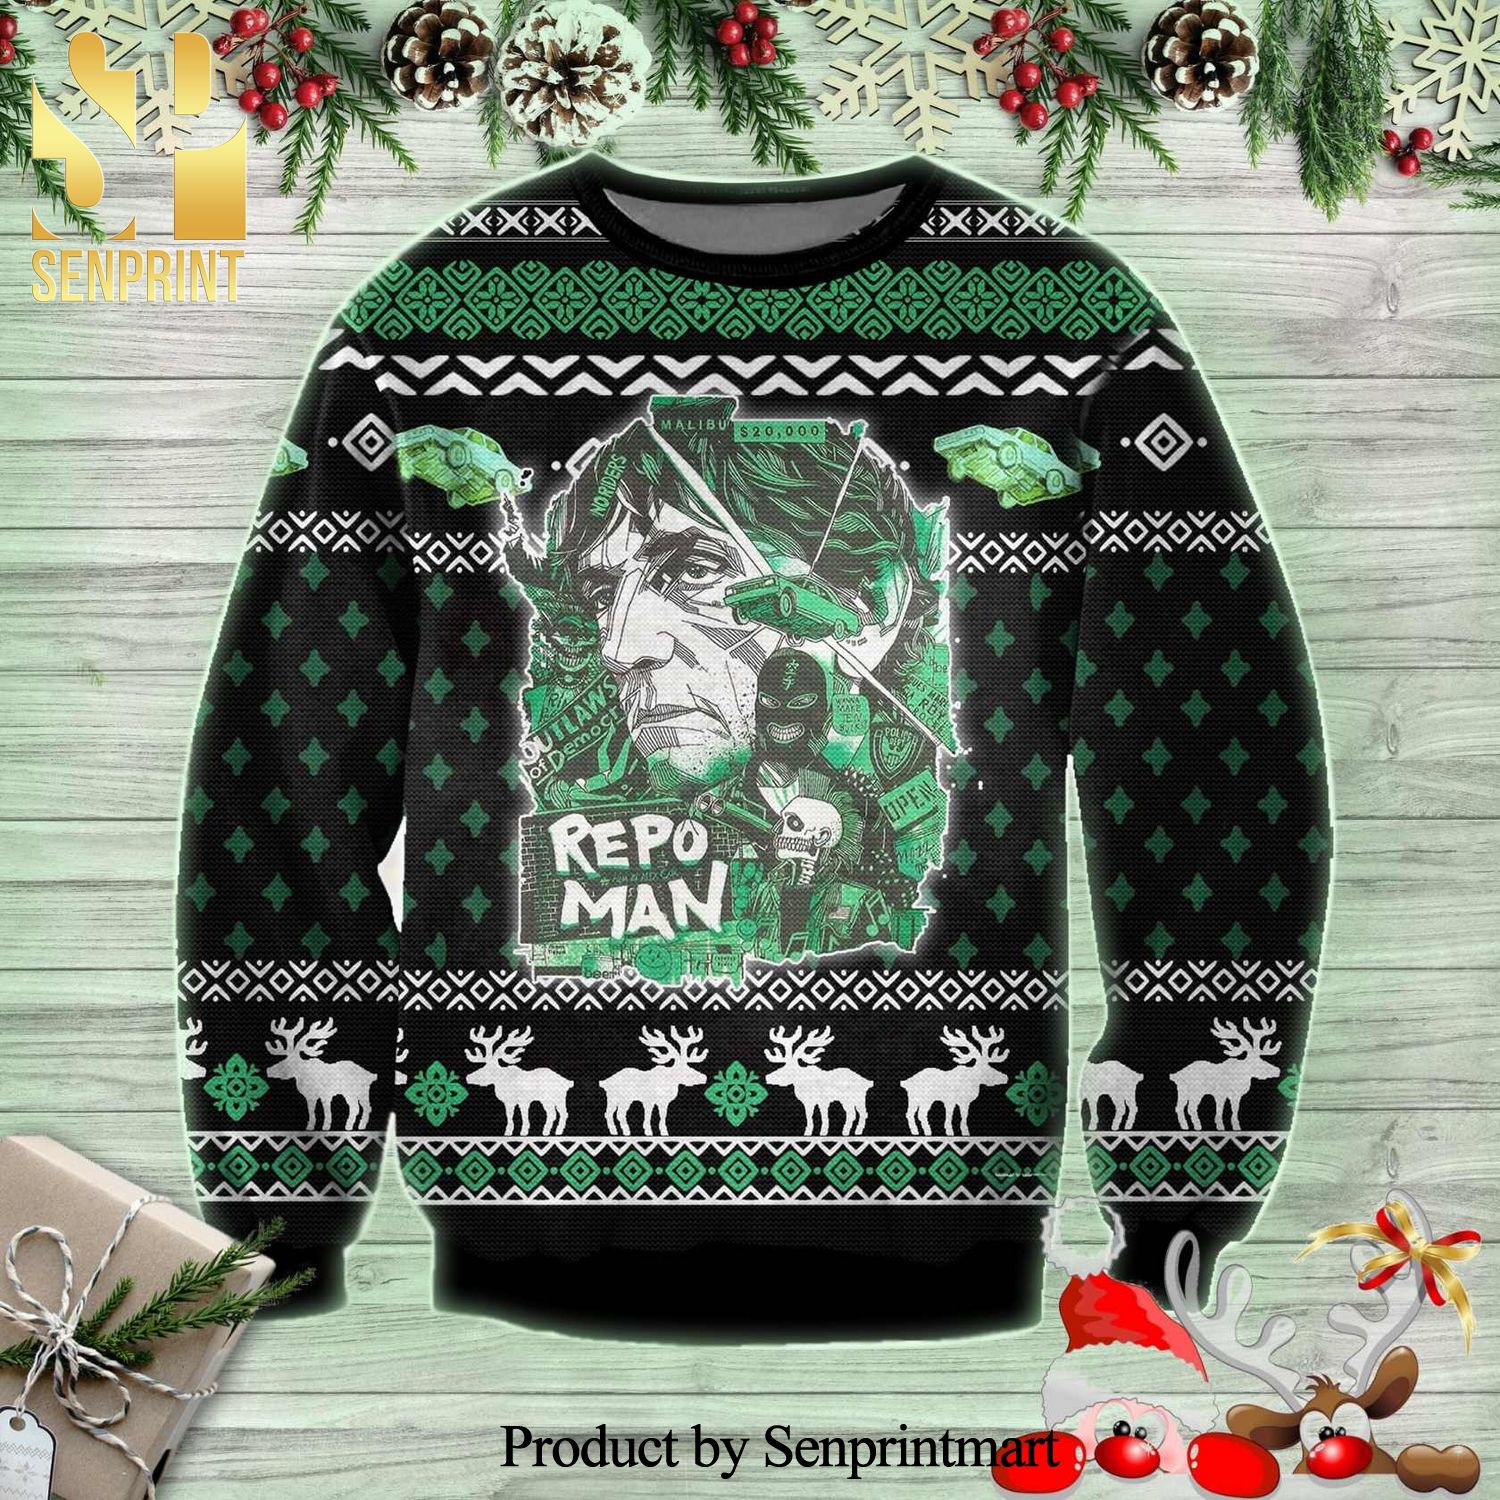 Bud Repo Man Comedy Knitted Ugly Christmas Sweater